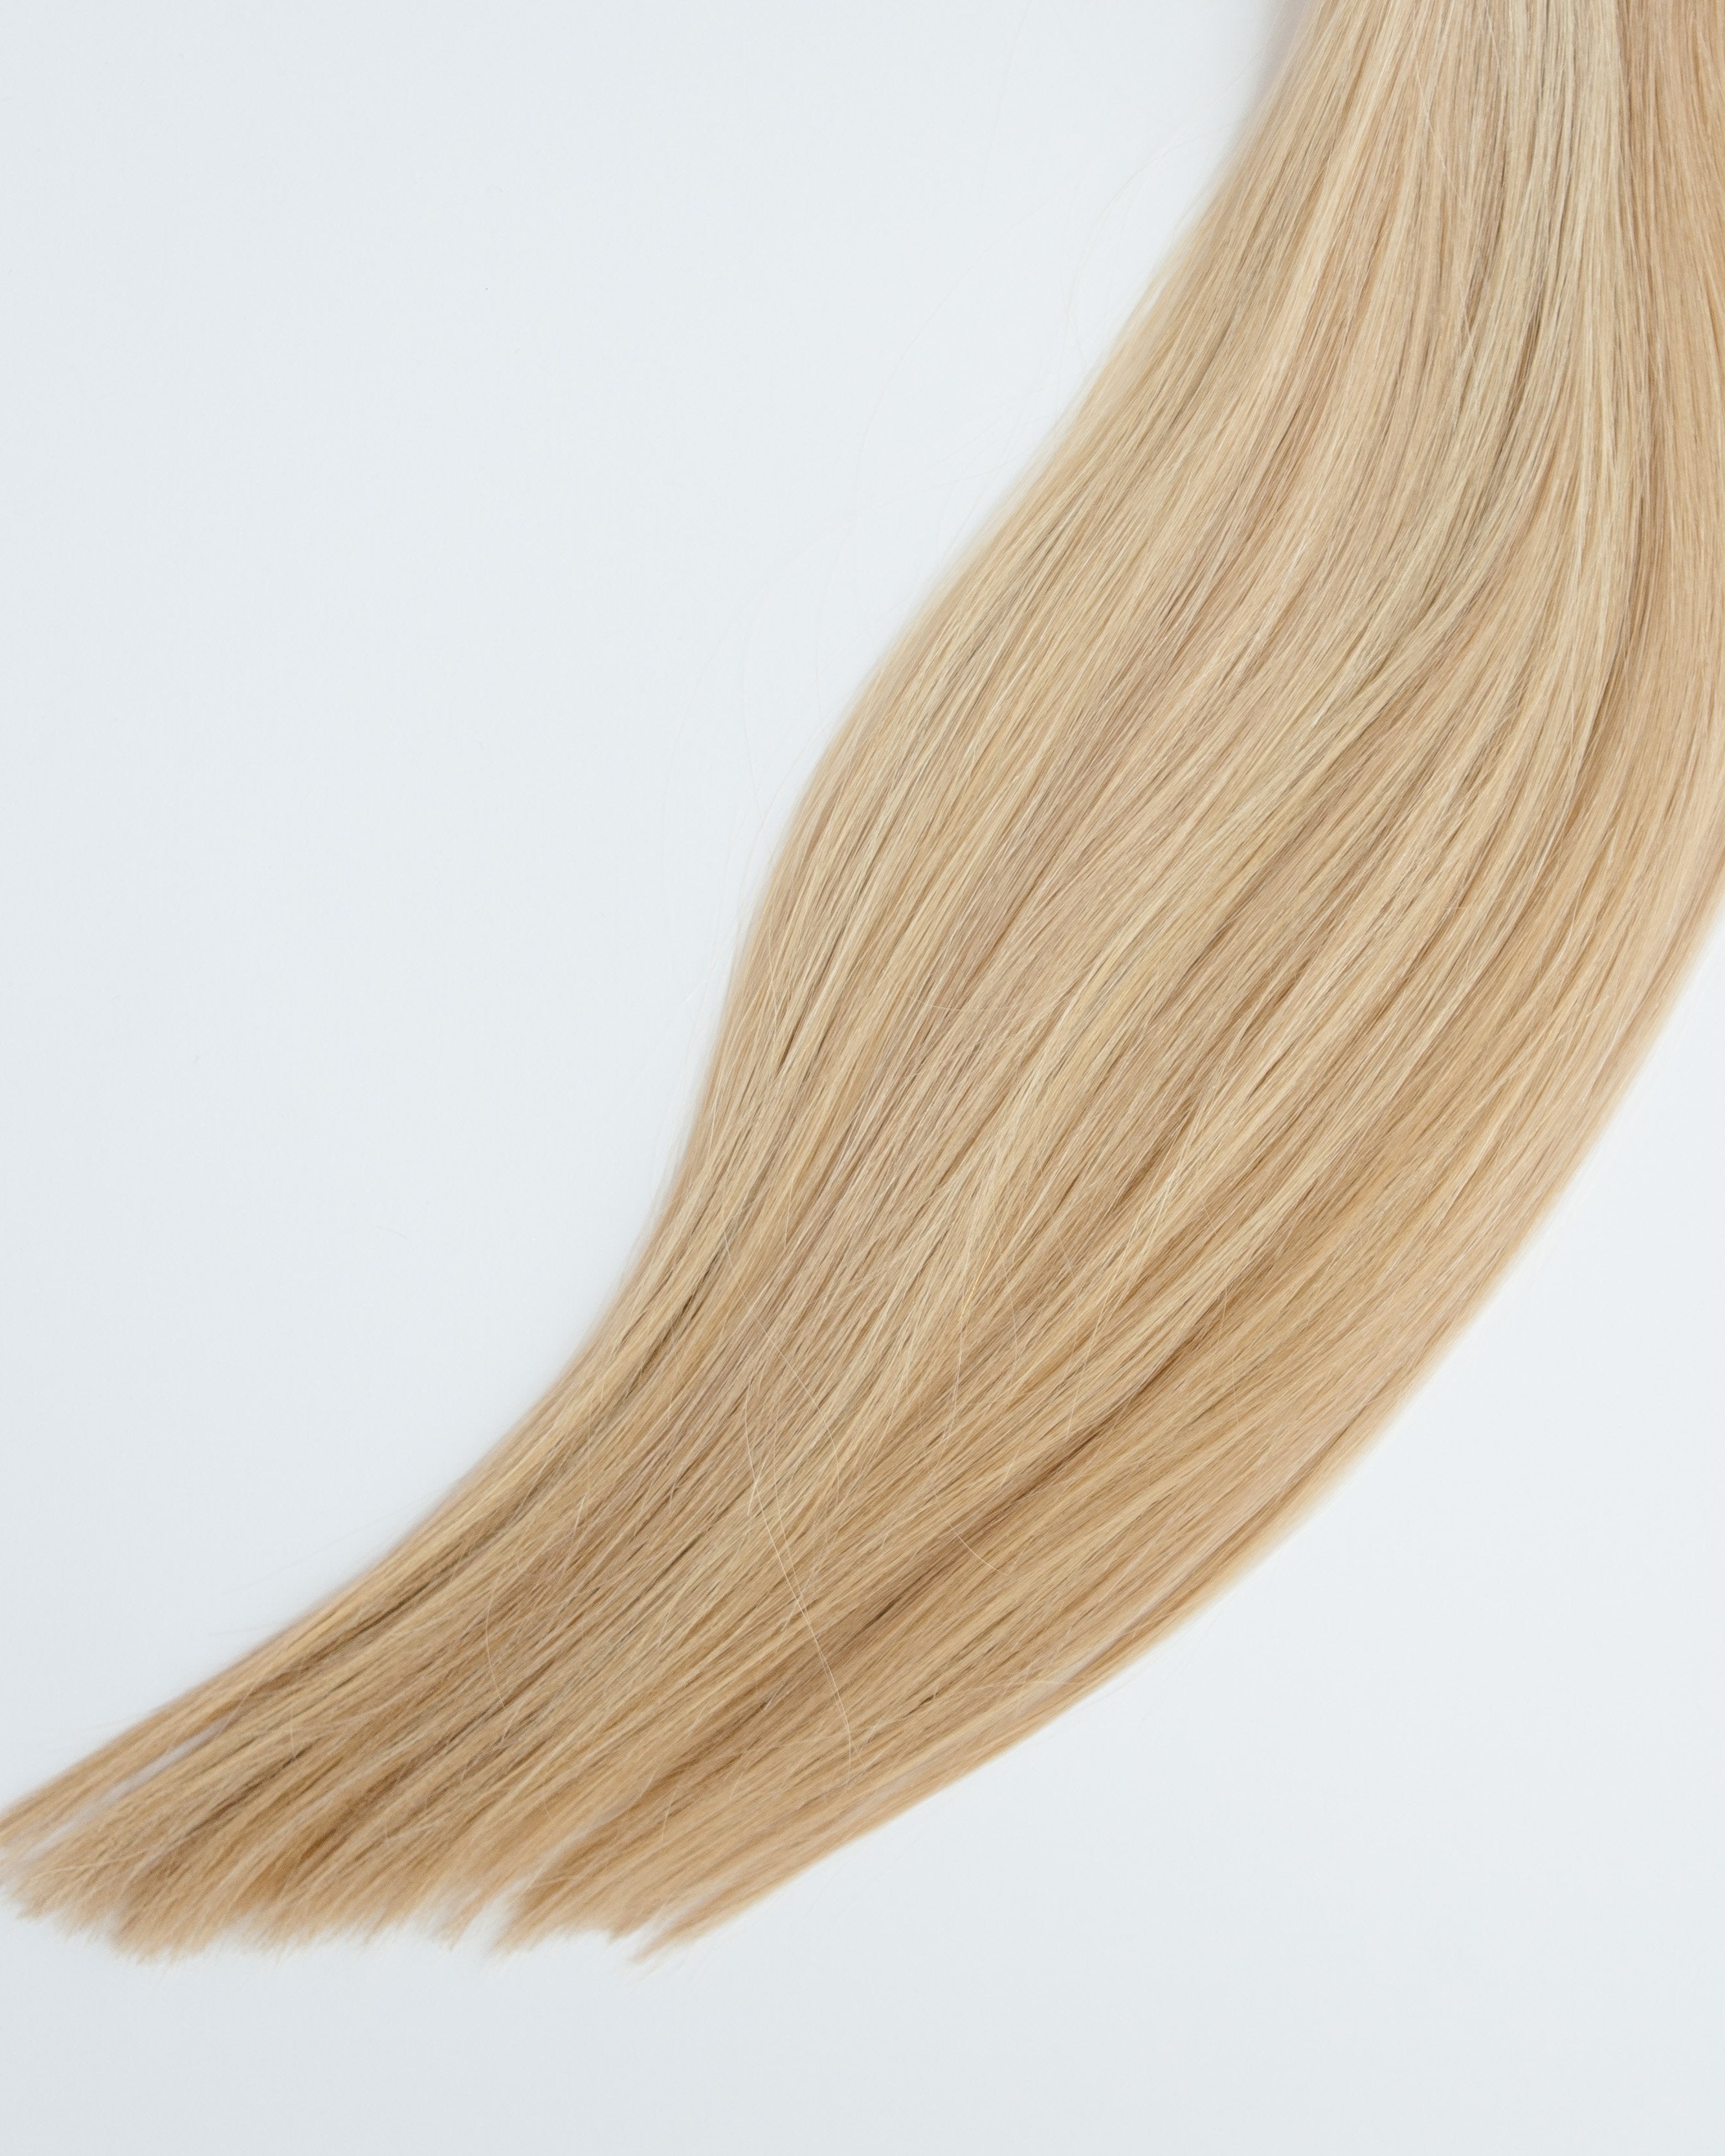 Laced Hair I-Tip Extensions Dimensional #14/24